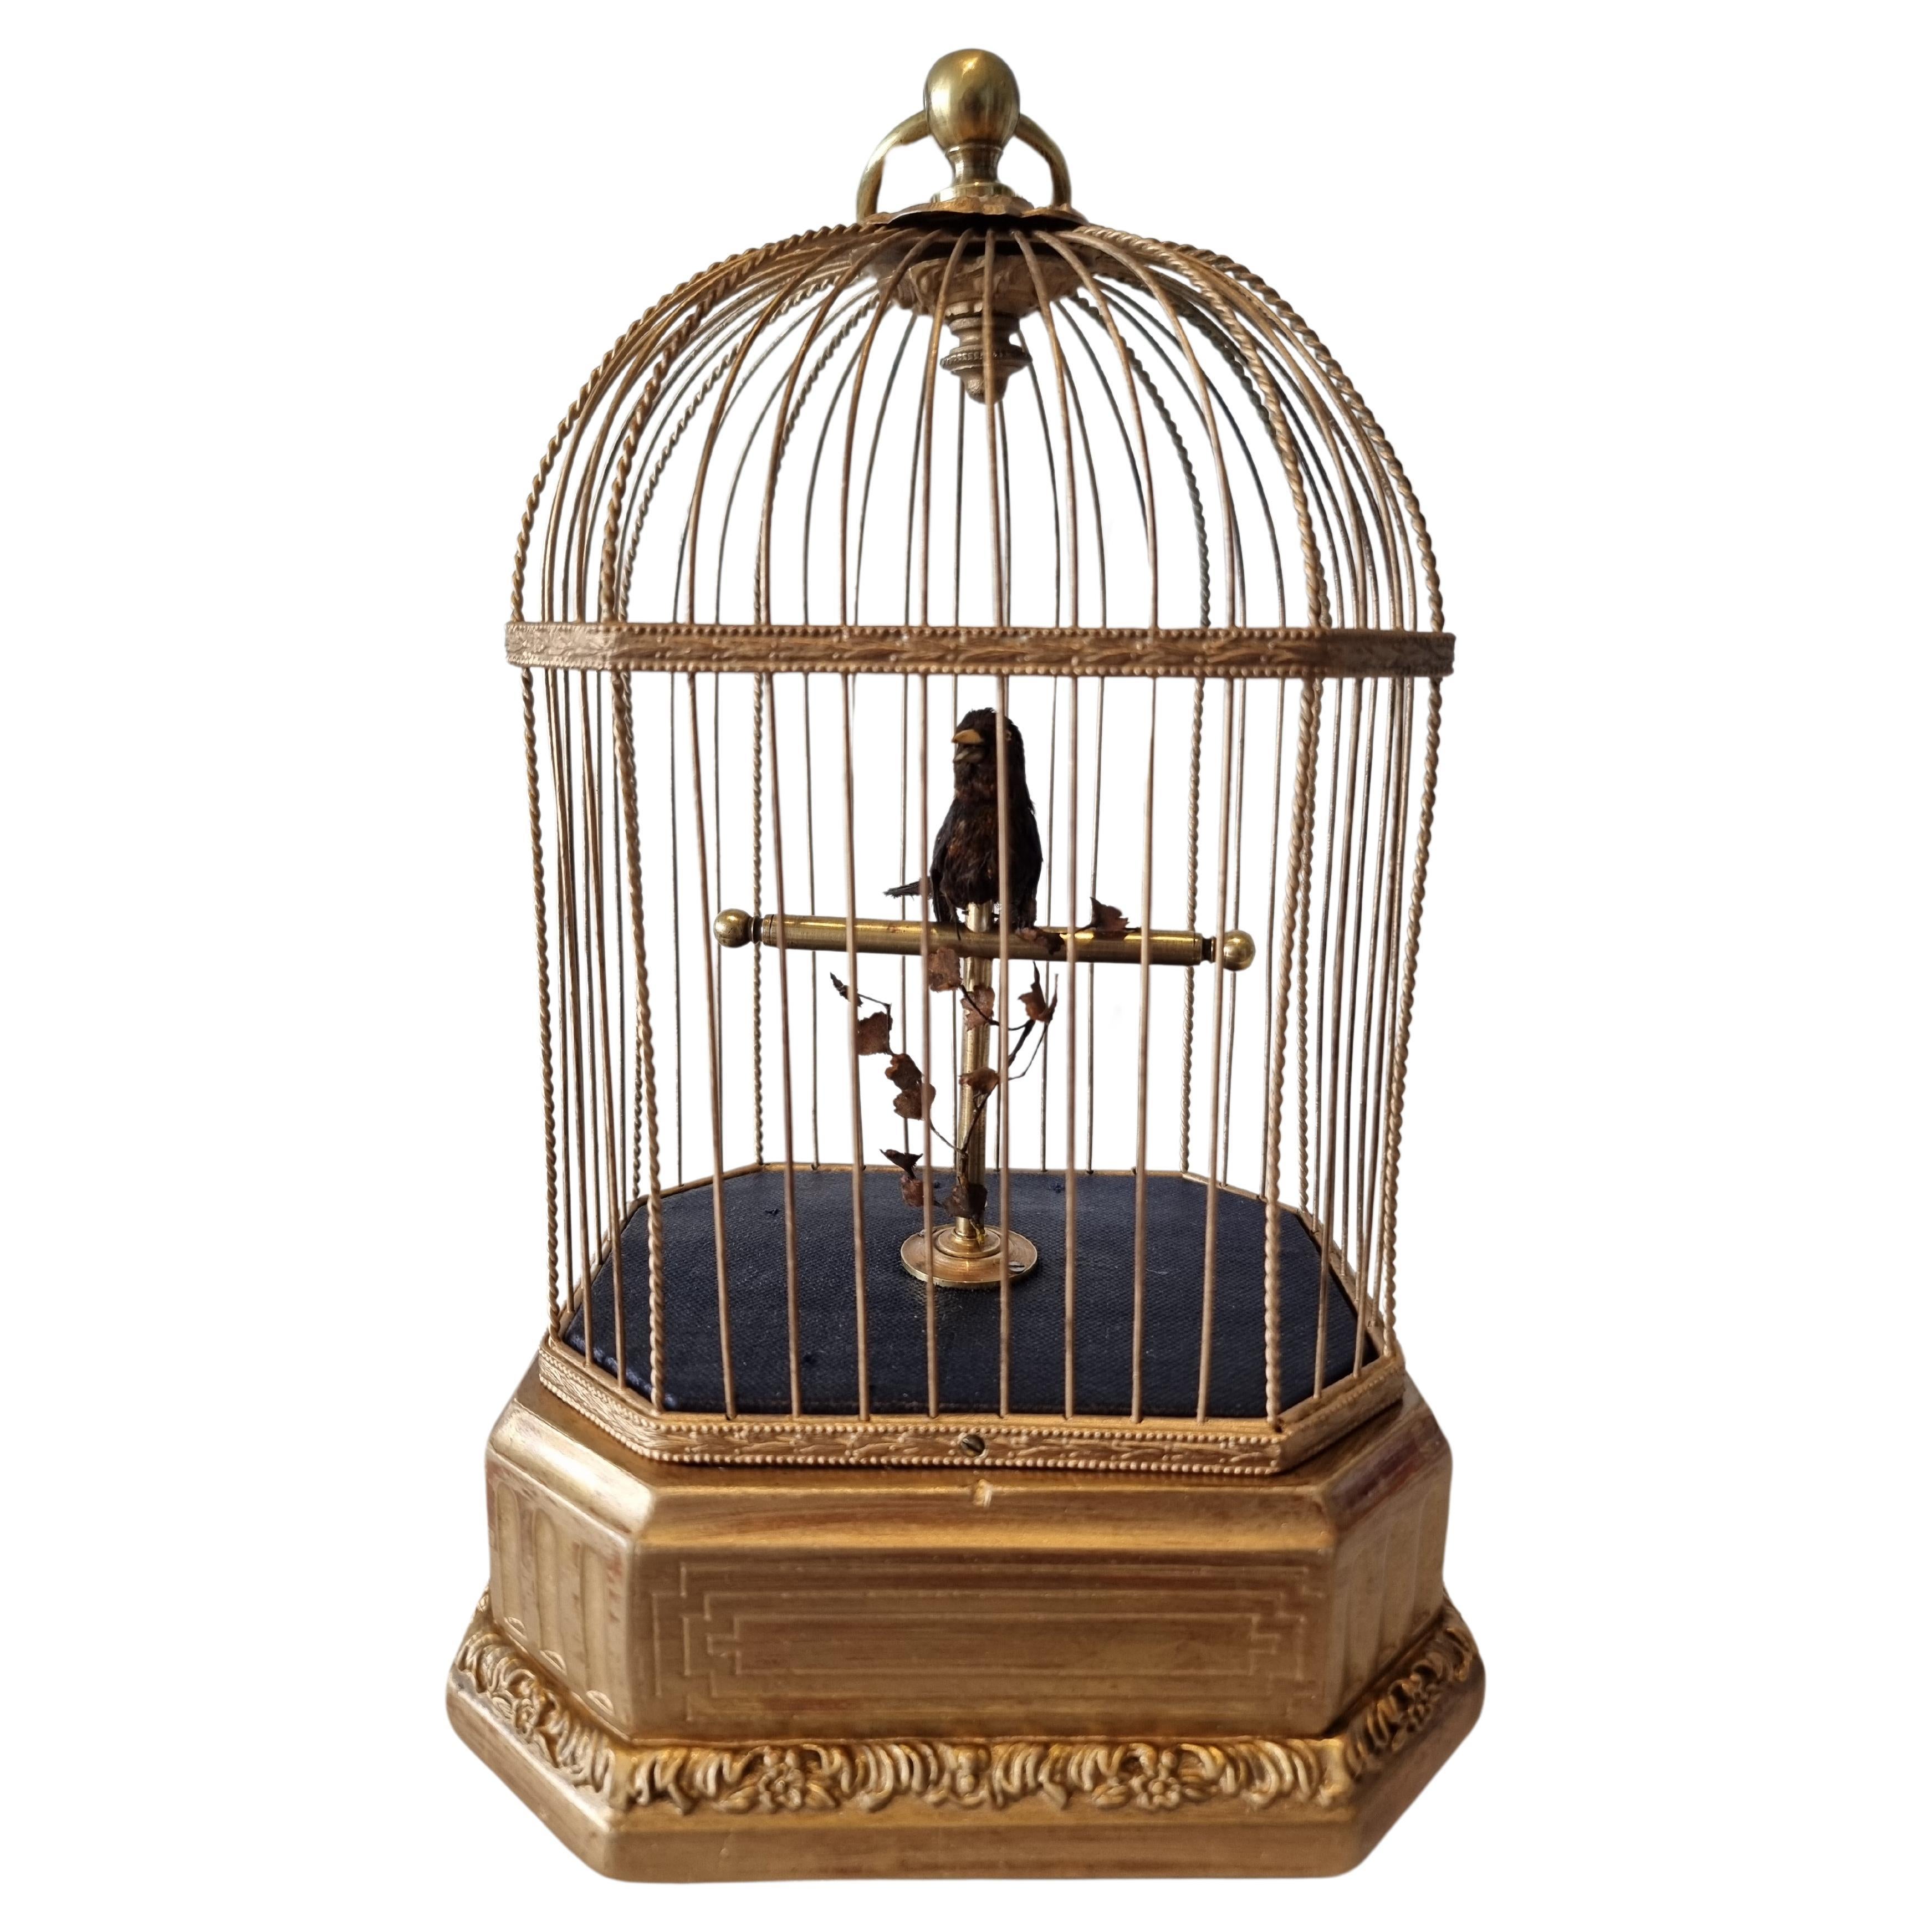 Miniature Singing bird in cage by Karl Griesbaum For Sale